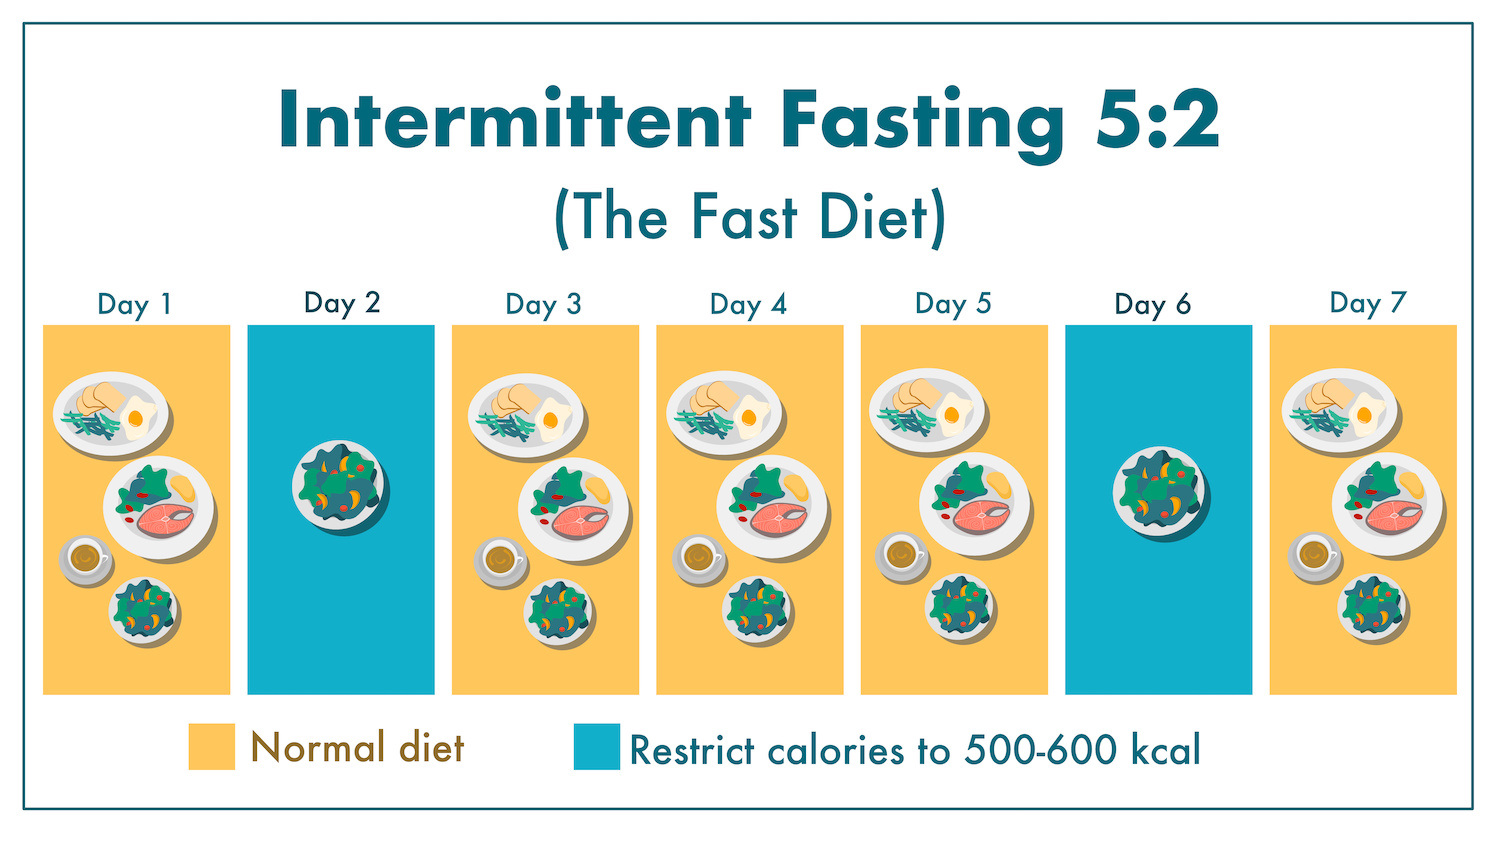 While intermittent fasting can have potential health benefits, it is essential to listen to your body and consider these potential side effects. If you experience severe or persistent side effects, it is recommended to seek medical advice.